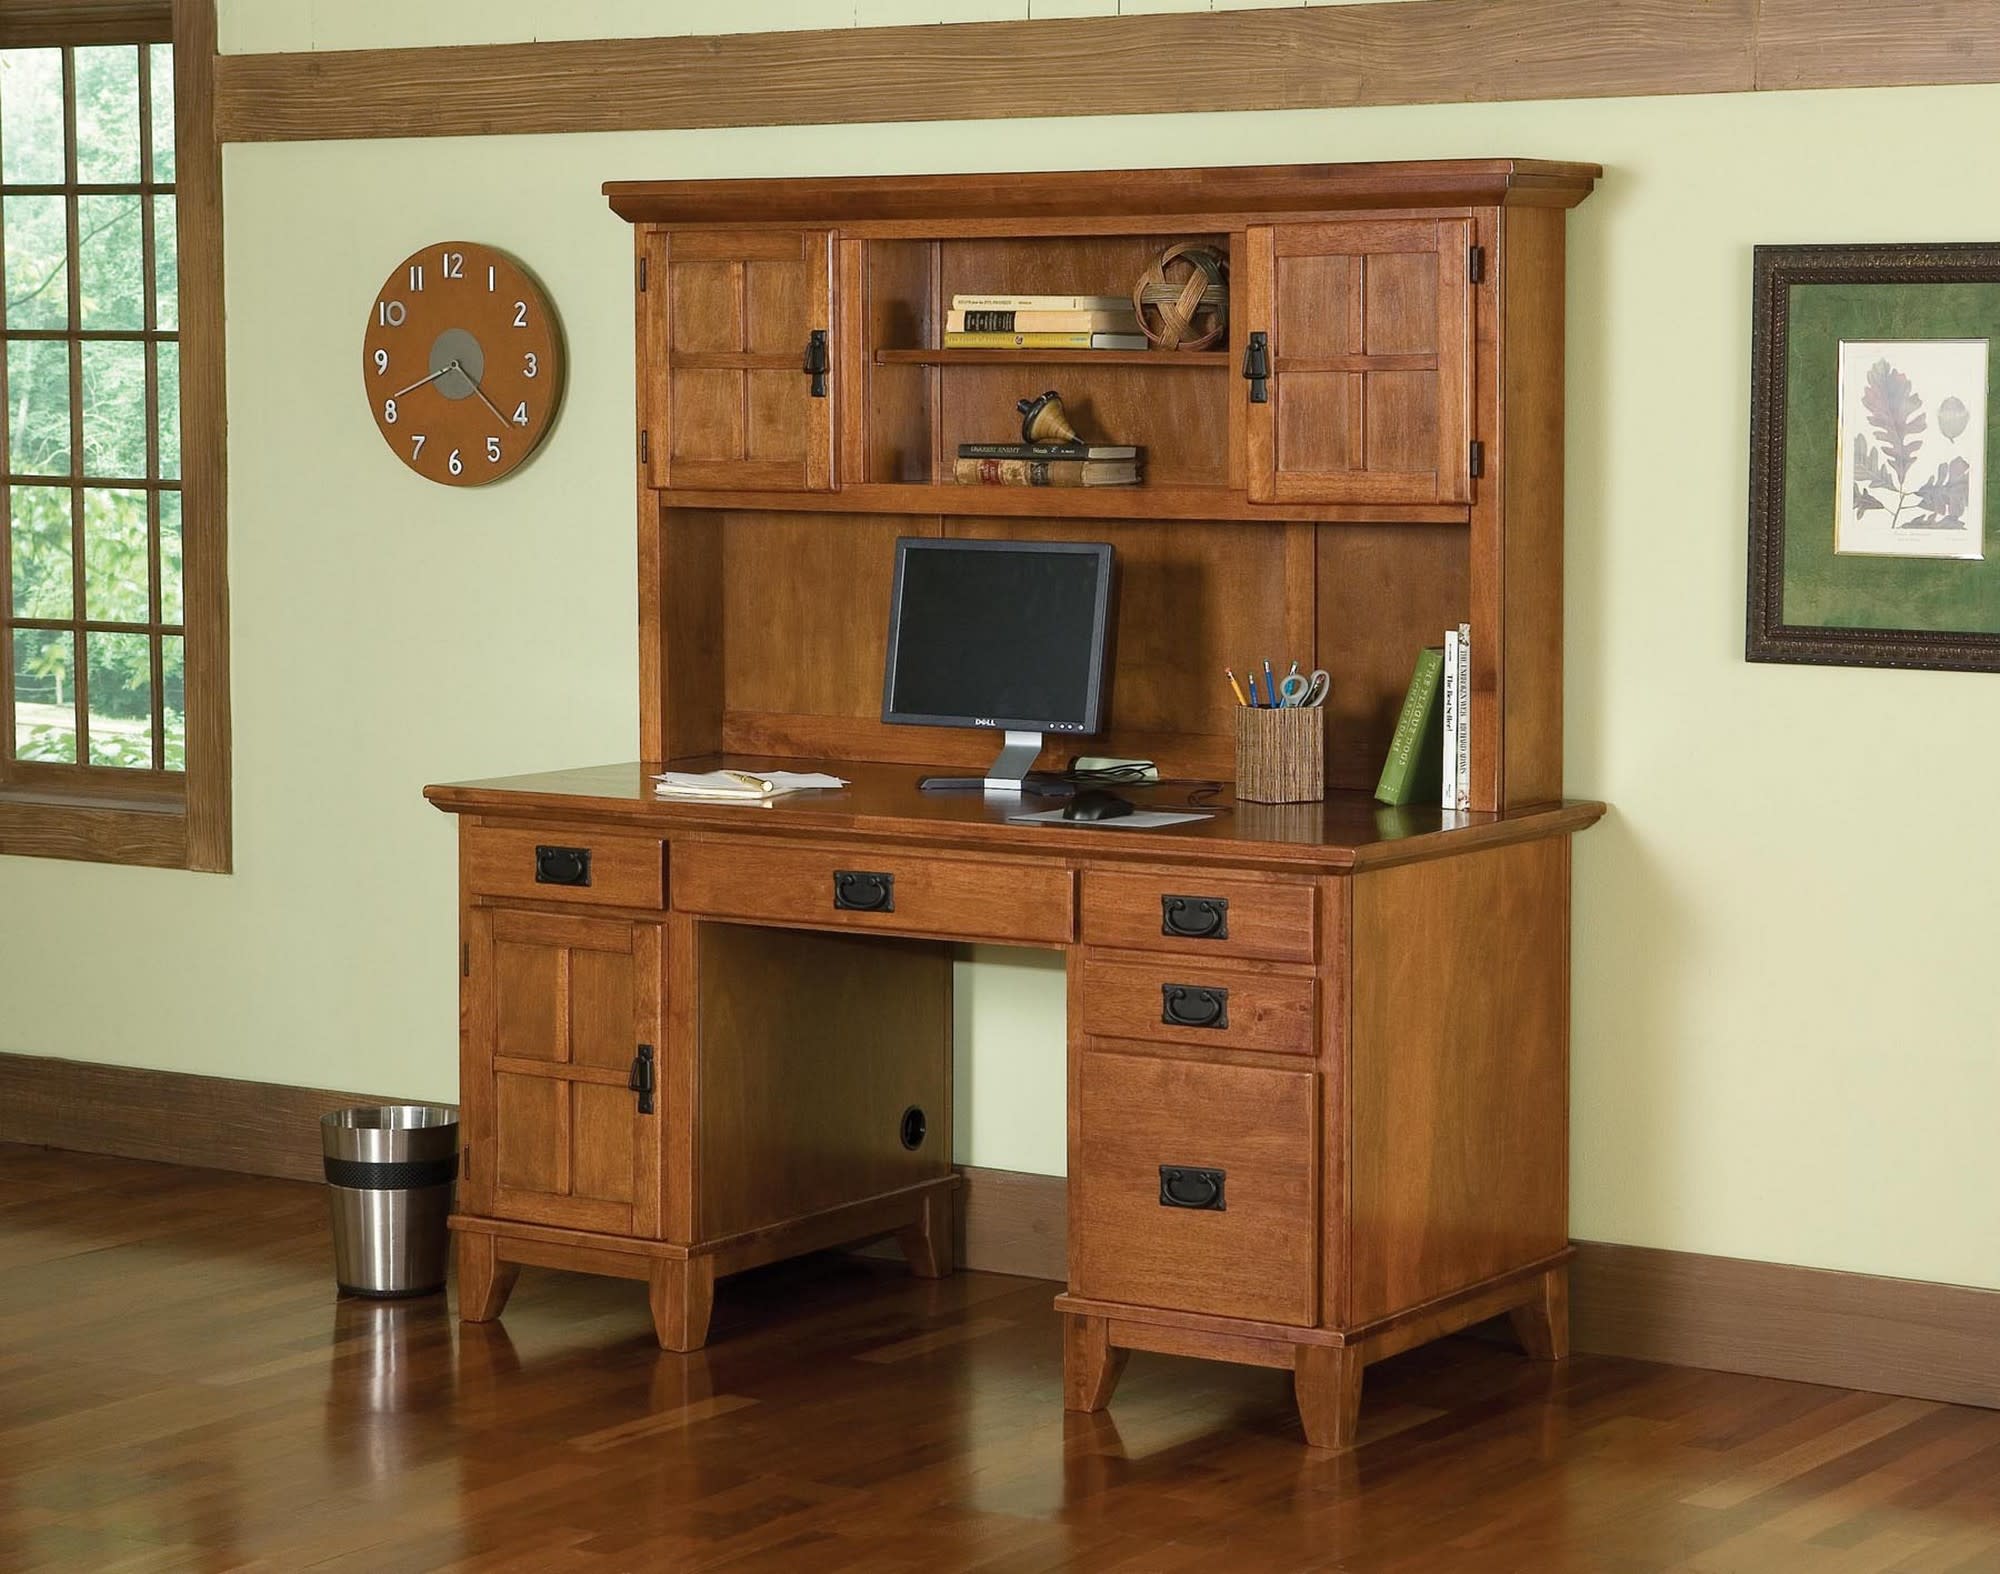 Arts and Crafts Pedestal Desk and Hutch Cottage Oak Finish by Homestyles - image 2 of 2